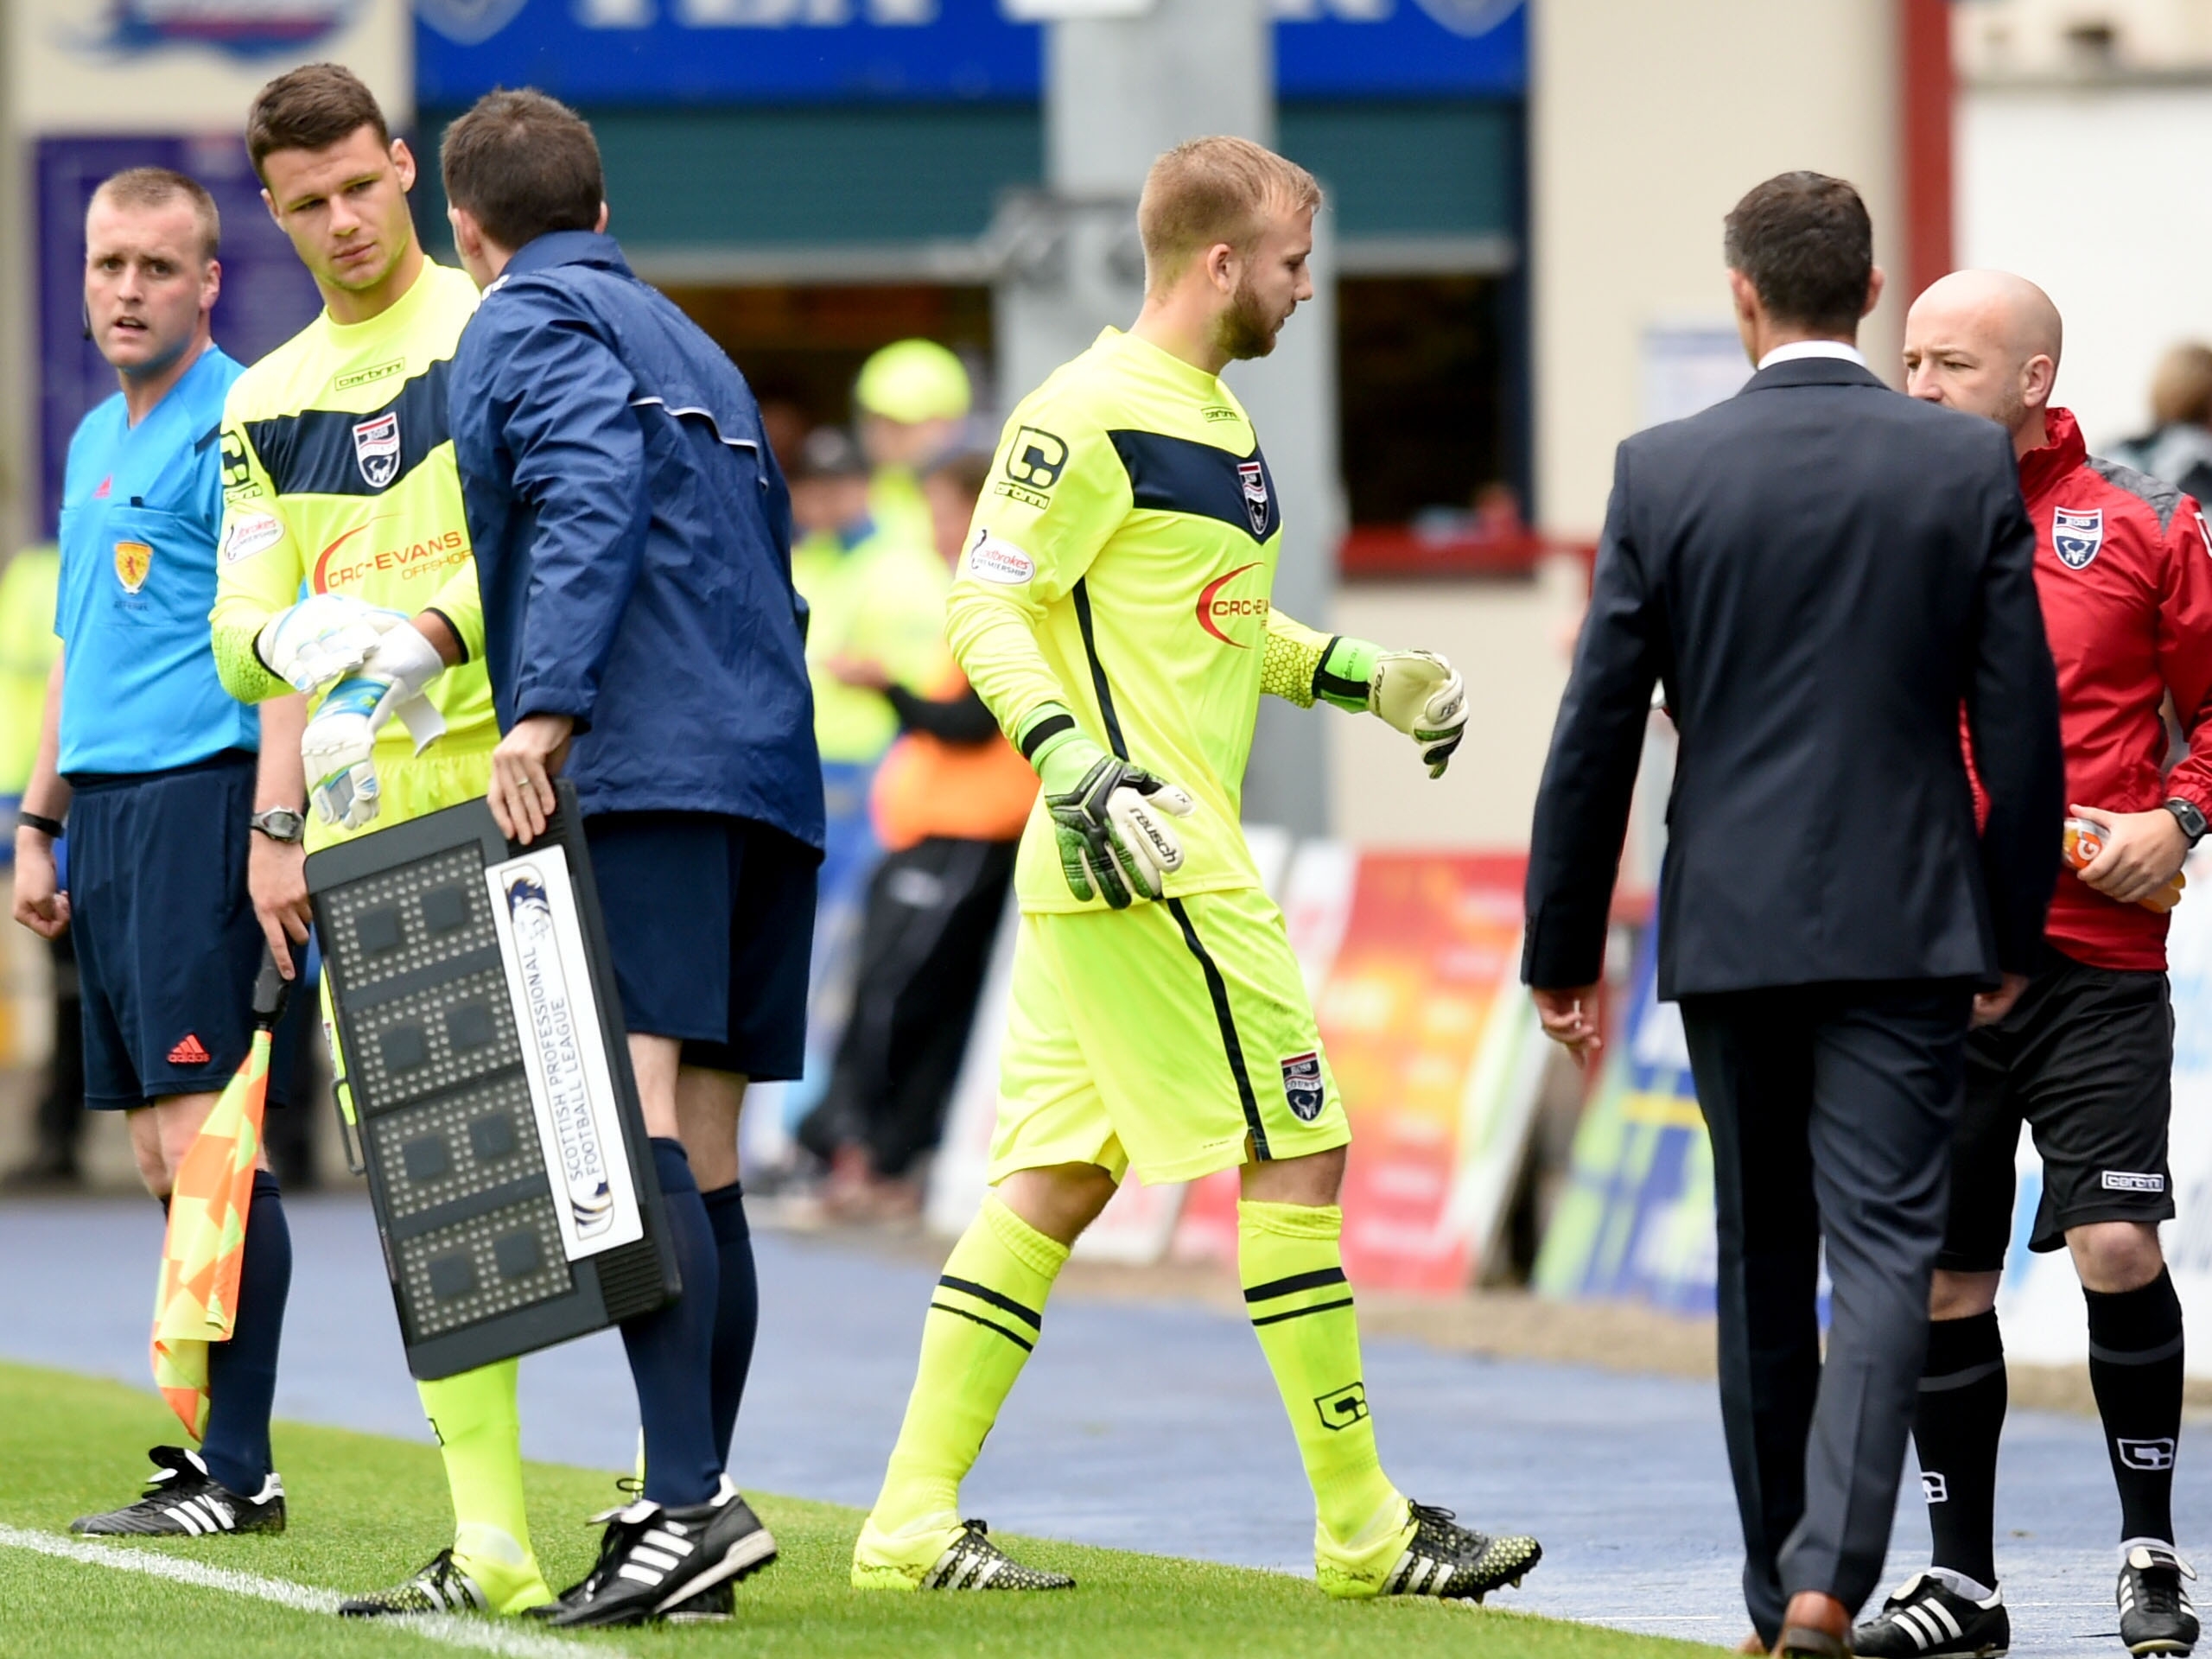 Ross County goalkeeper Scott Fox comes off injured to be replaced by loanee Daniel Bachmann.